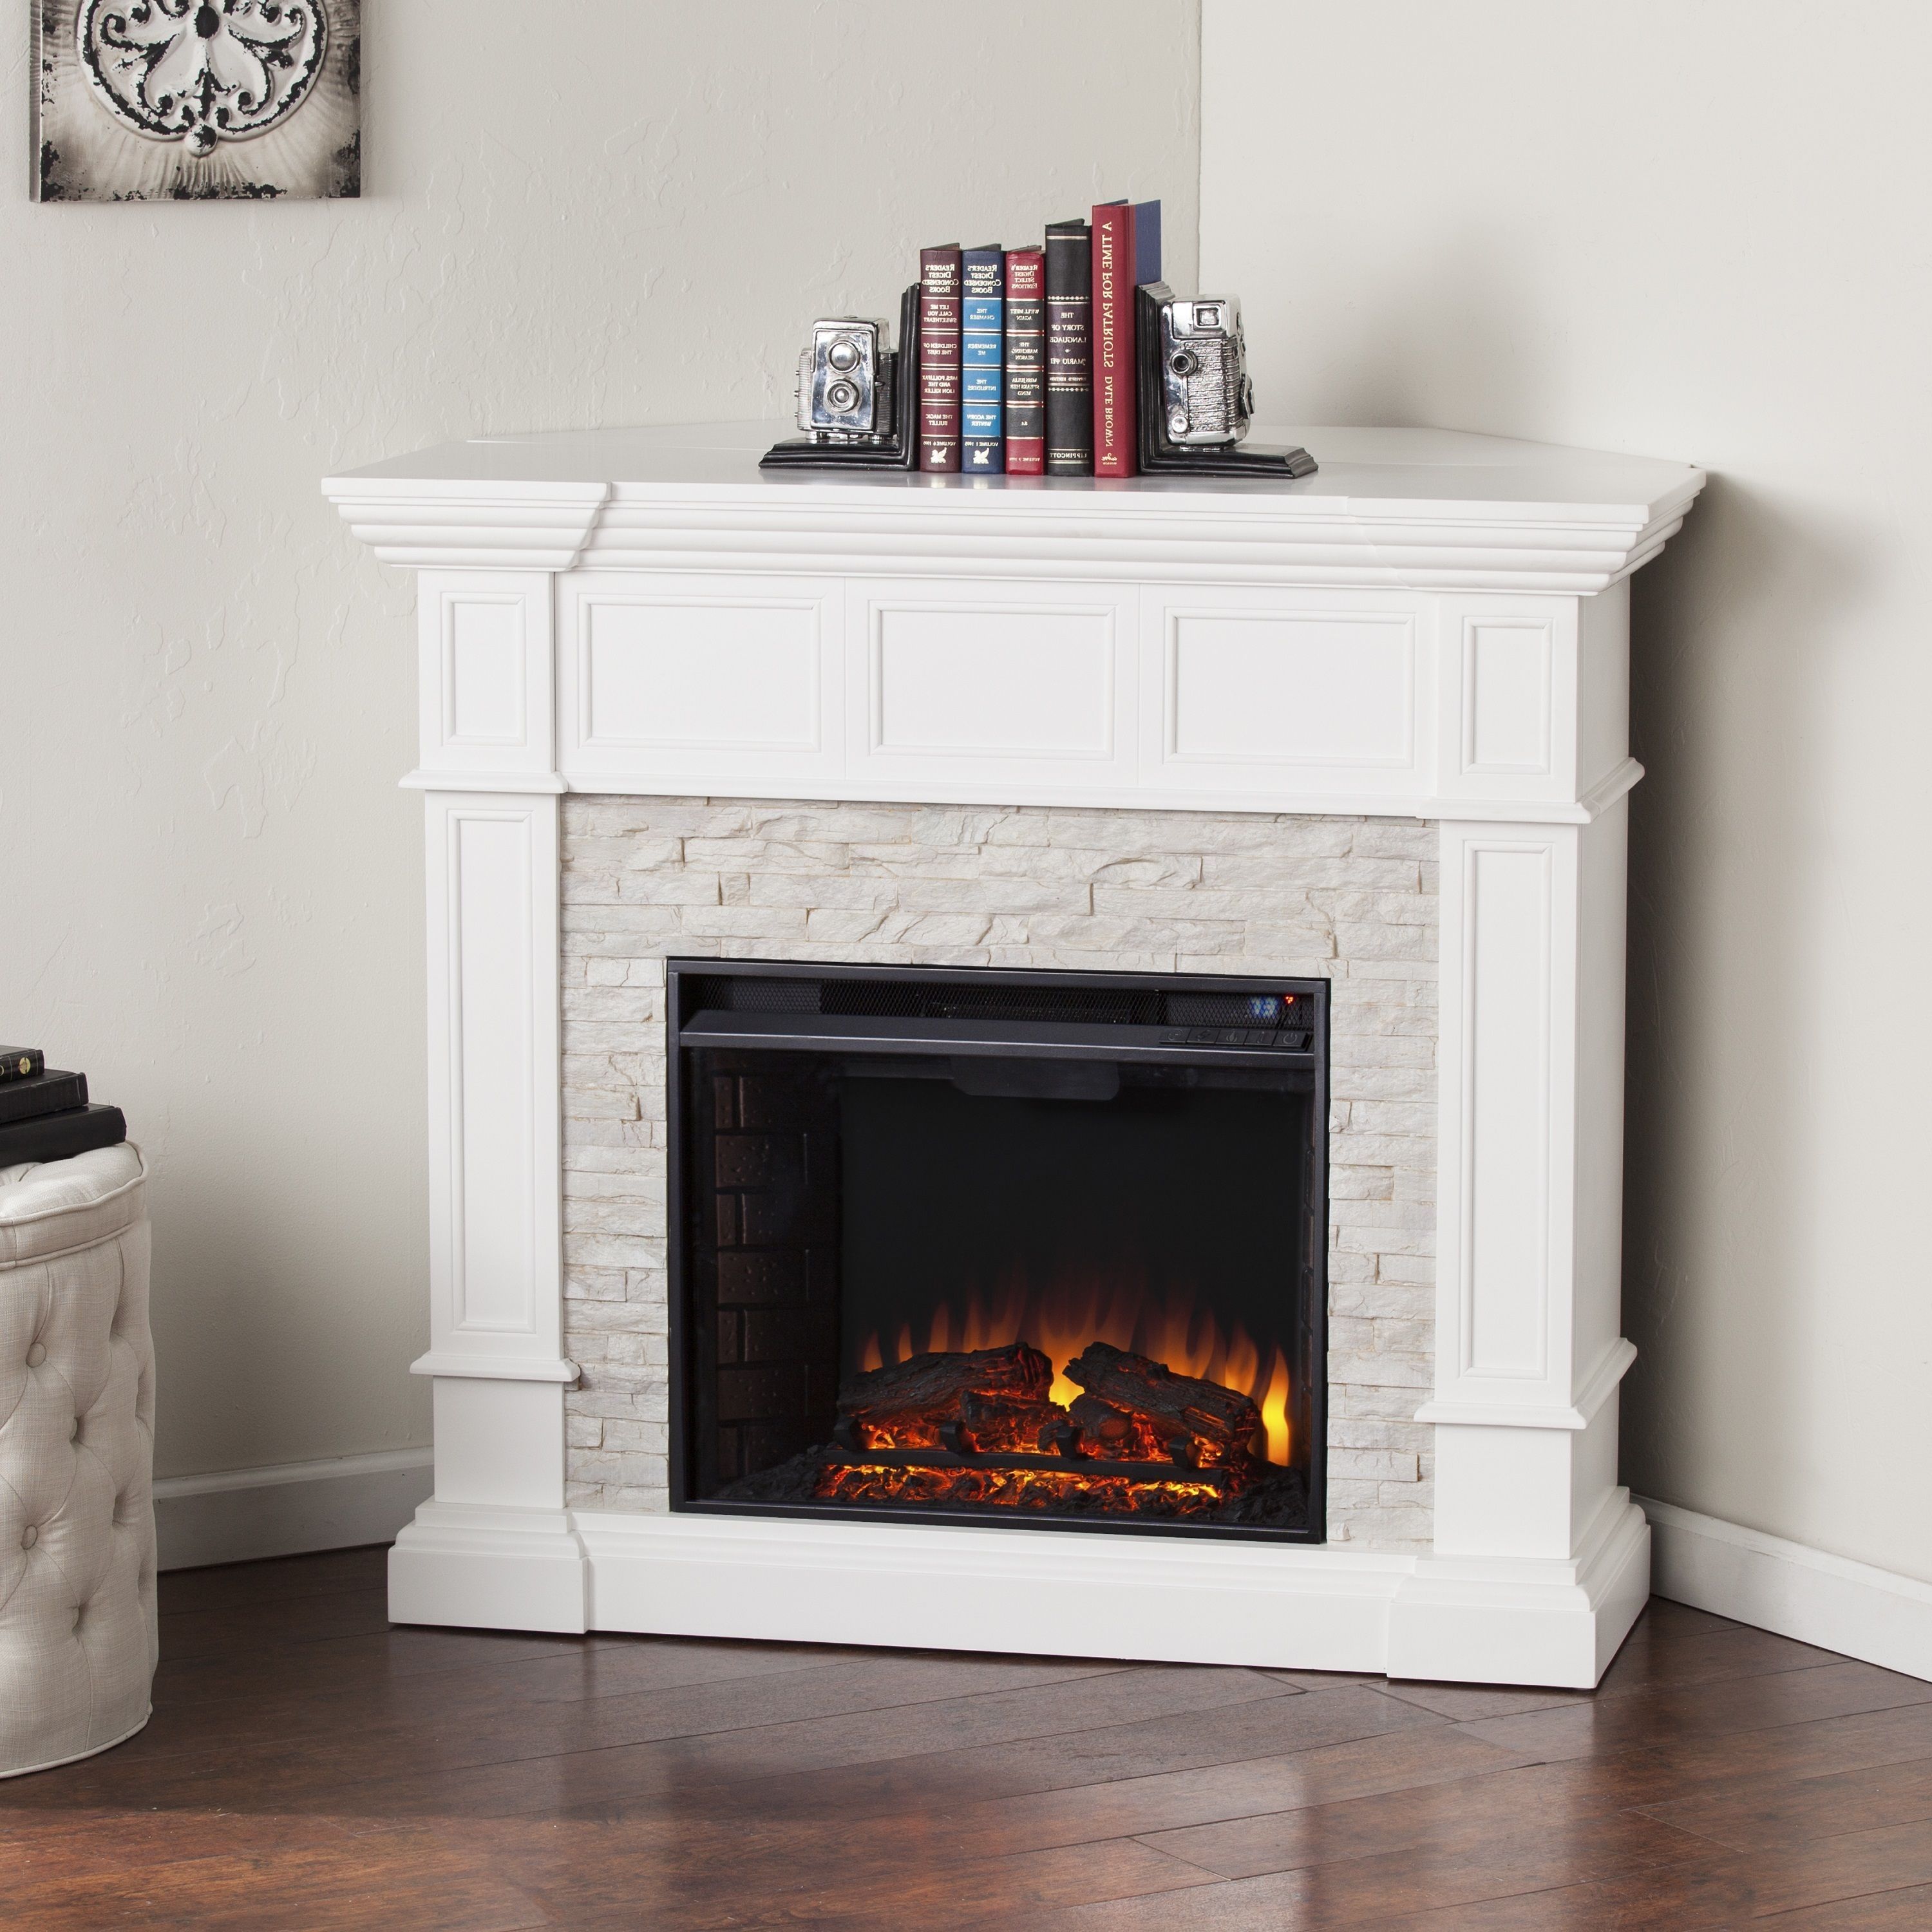 Freestanding Corner Fireplace Luxury 33 Modern and Traditional Corner Fireplace Ideas Remodel